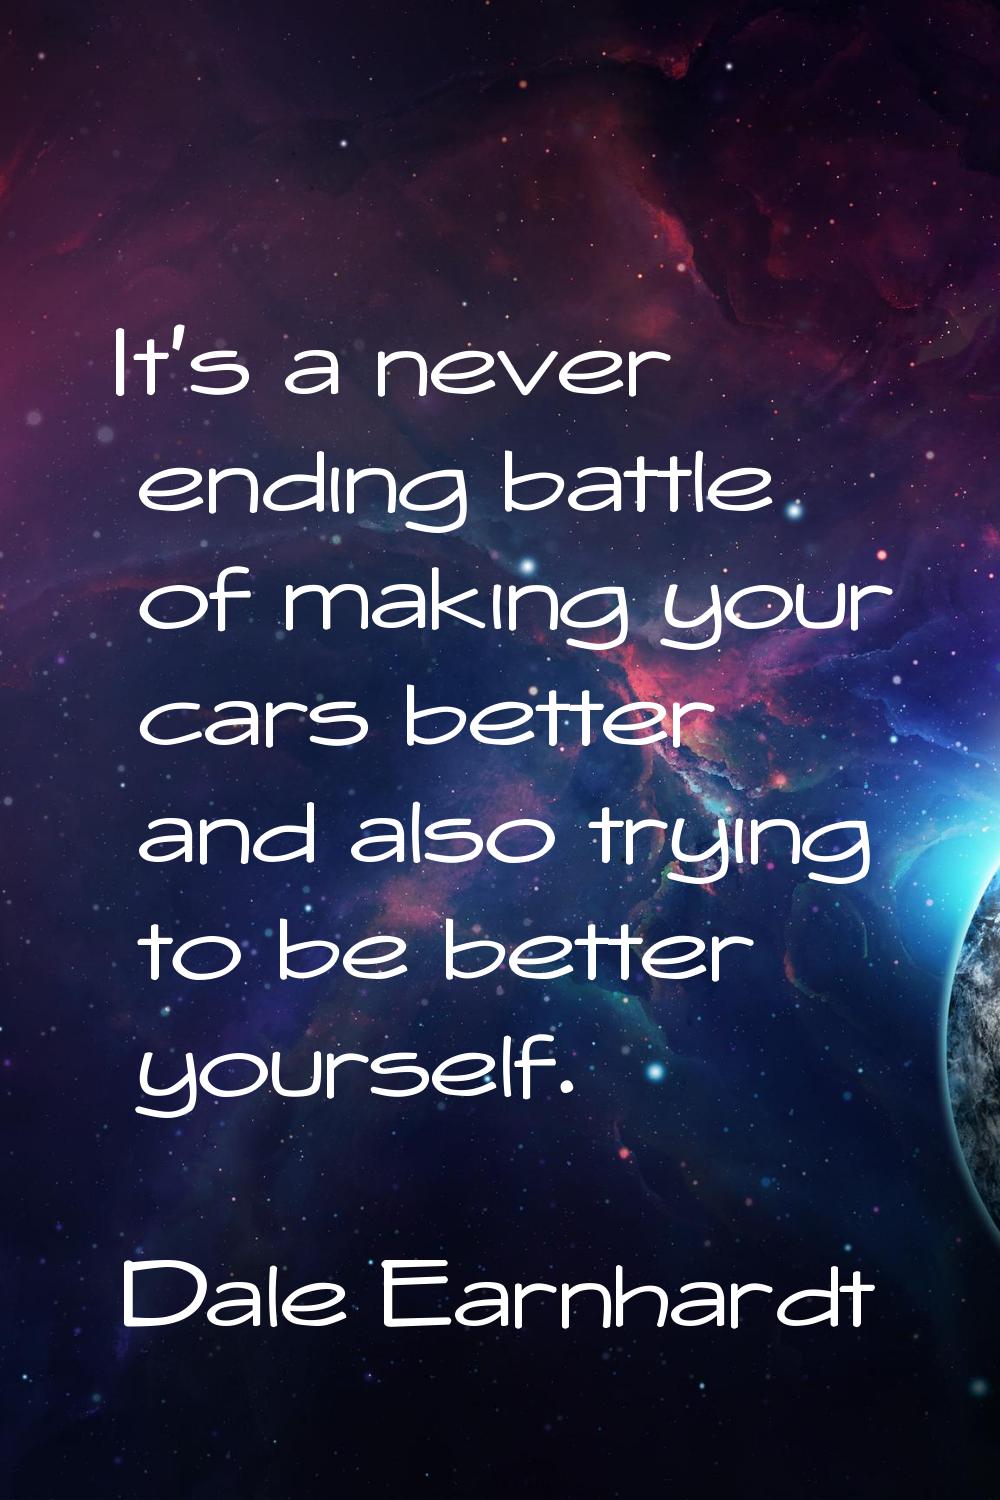 It's a never ending battle of making your cars better and also trying to be better yourself.